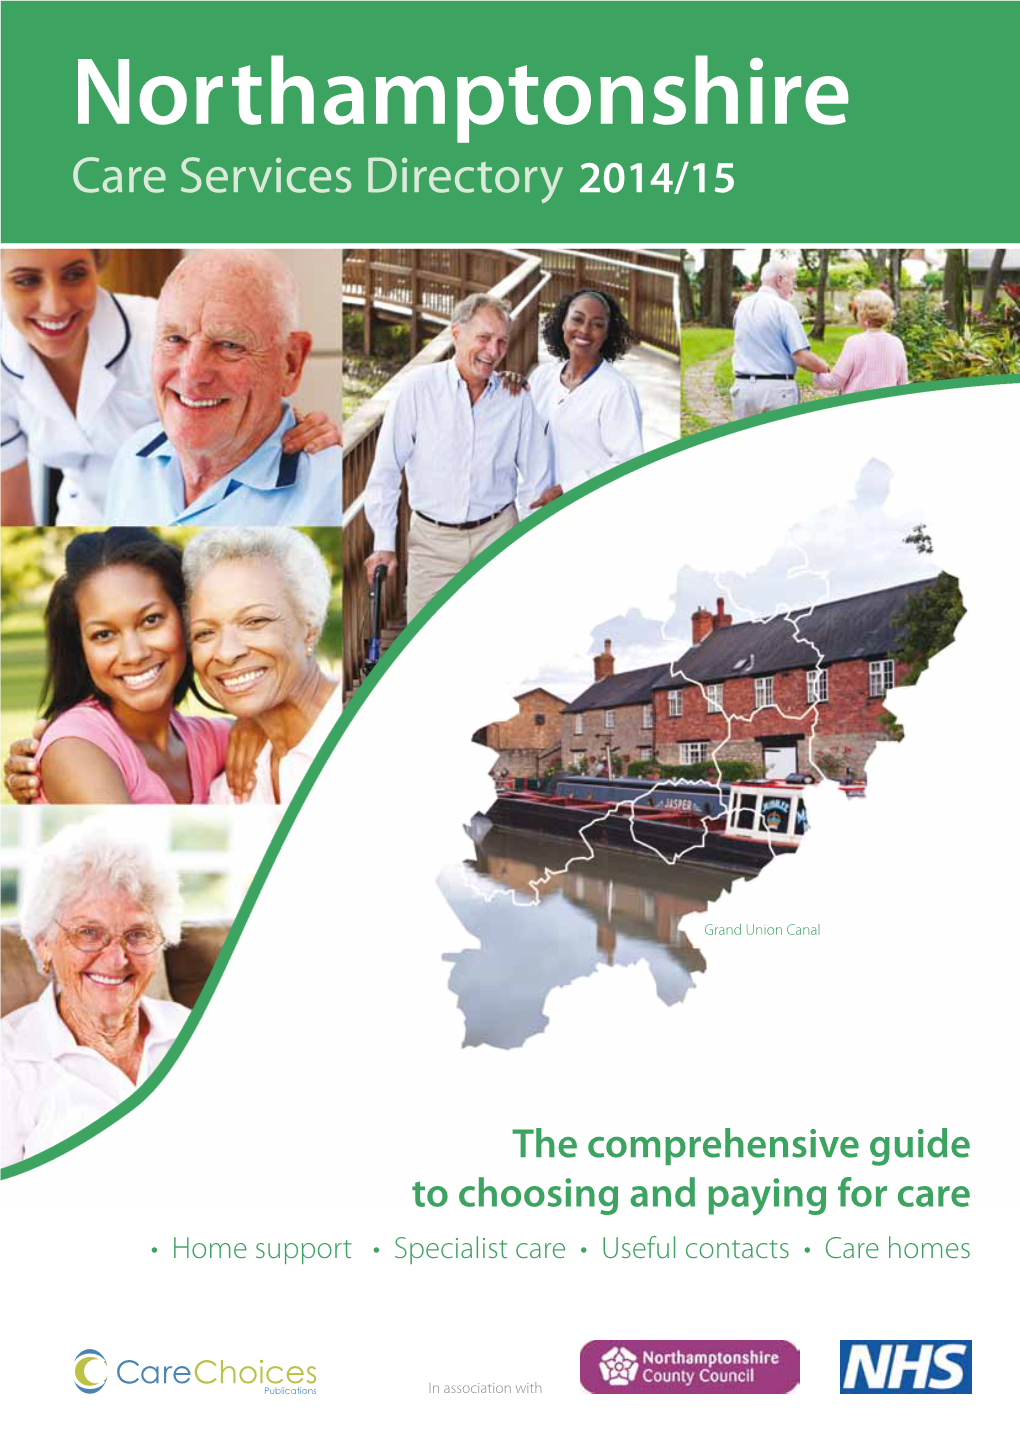 Northamptonshire Care Services Directory 2014/15